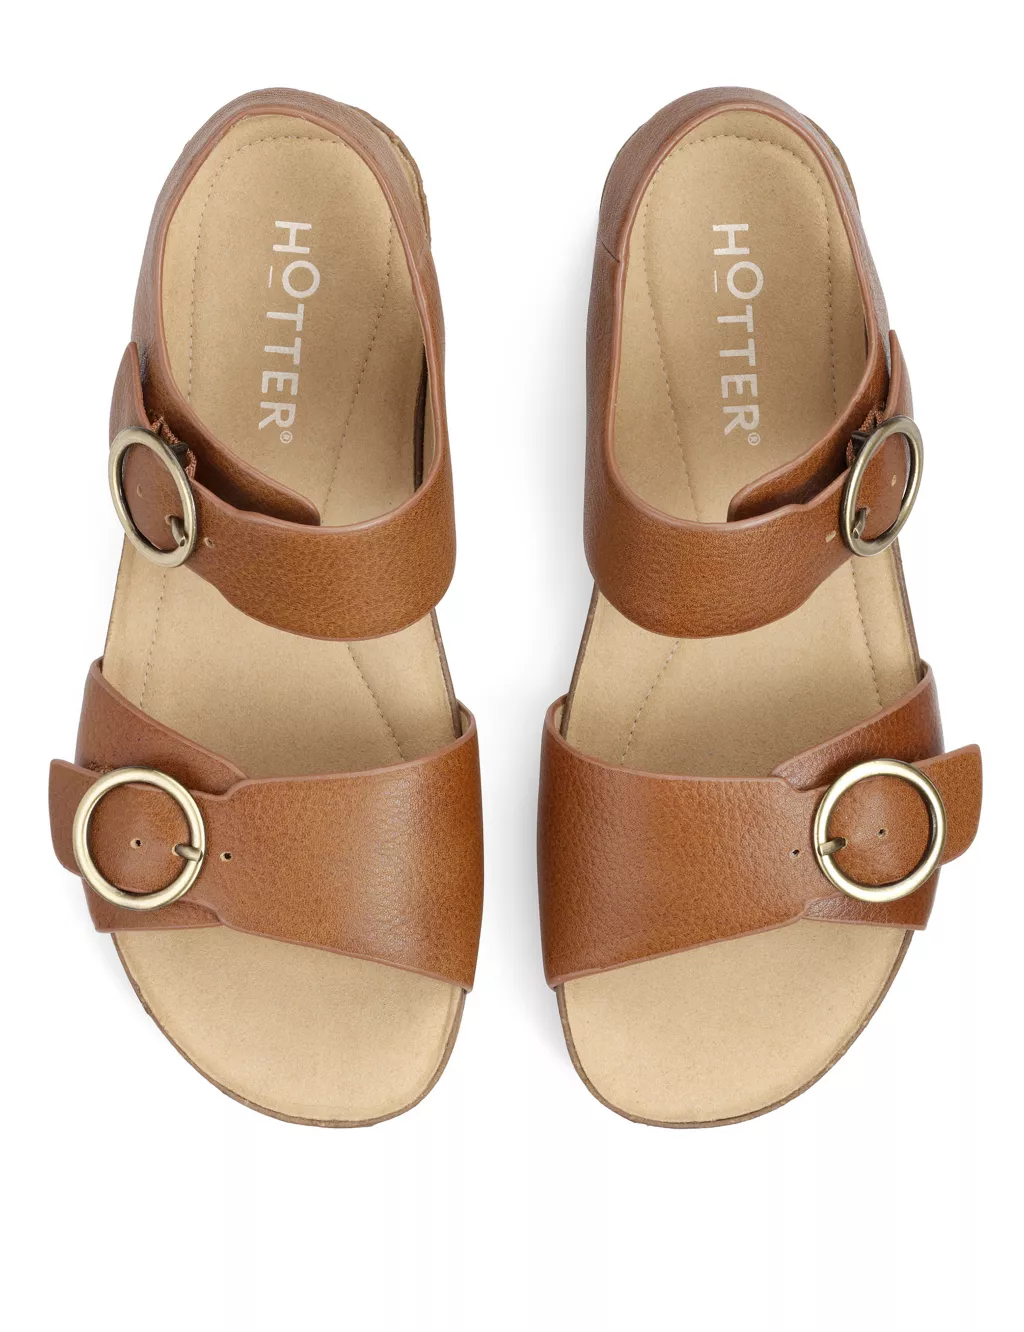 Tourist Ankle Strap Wedge Sandals Hotter | M&S